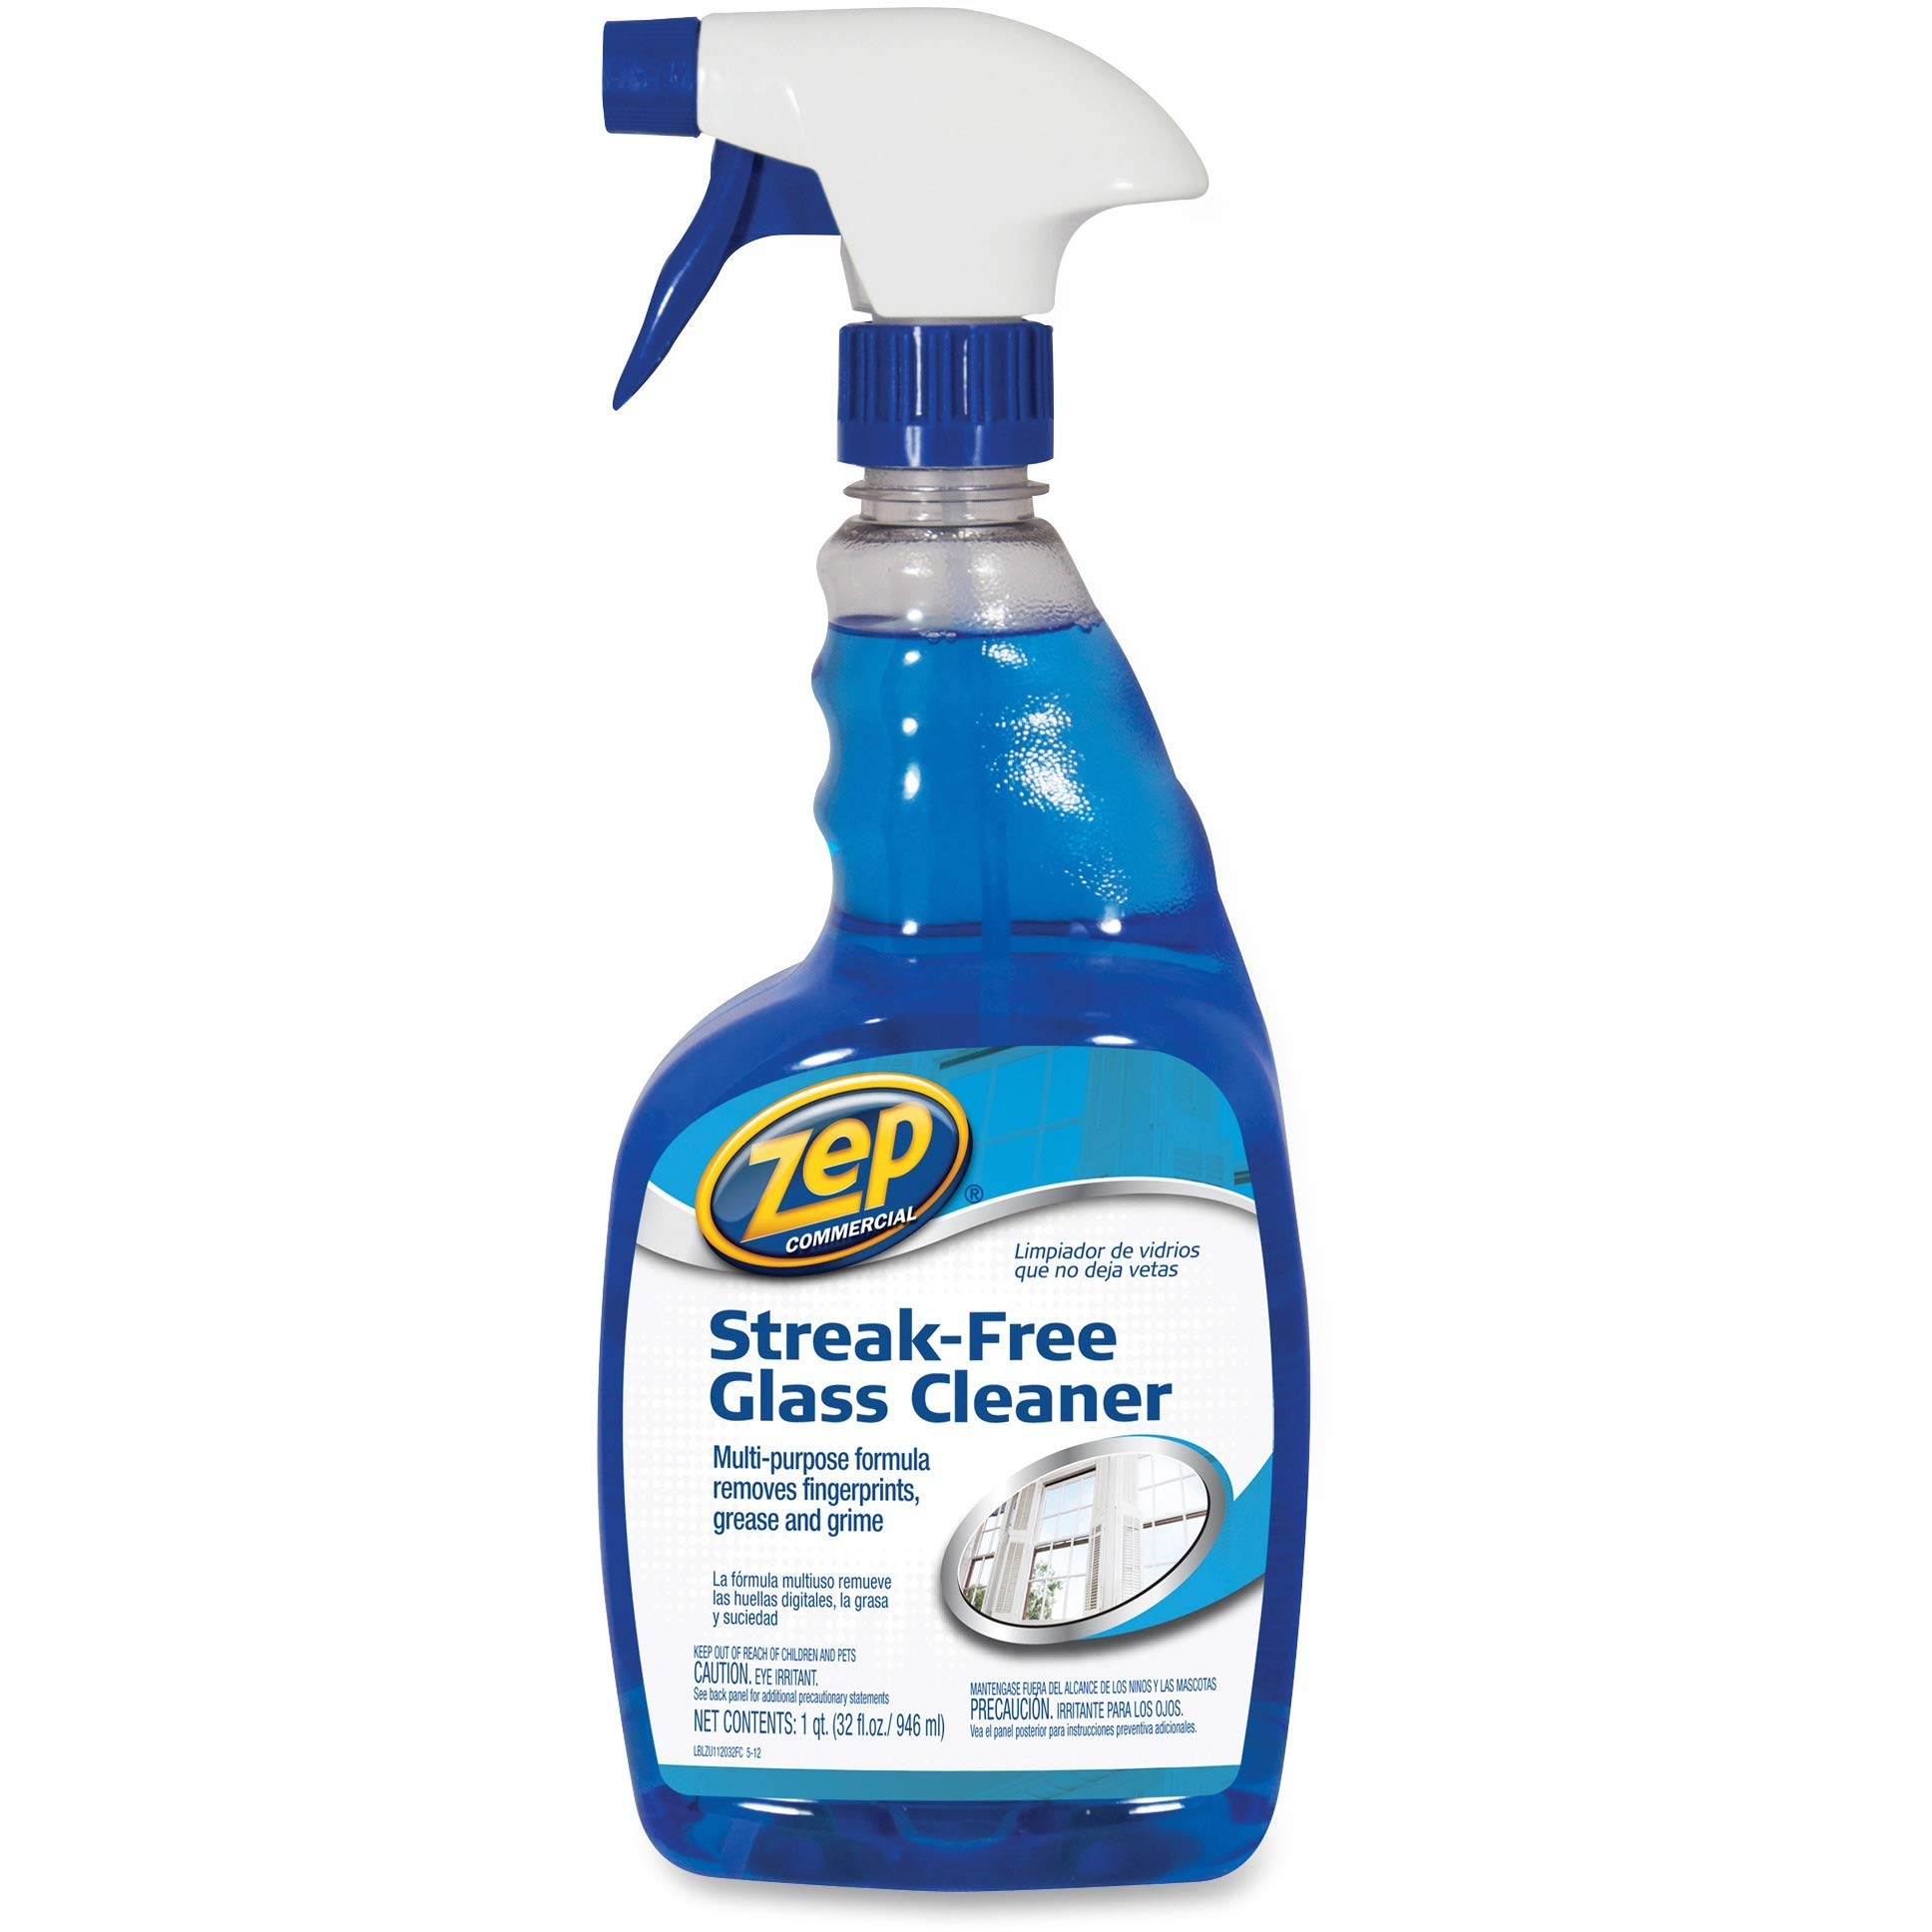 32-Oz Zep Streak-Free Glass Cleaner $1.66 + Free Shipping w/ Prime or on $25+